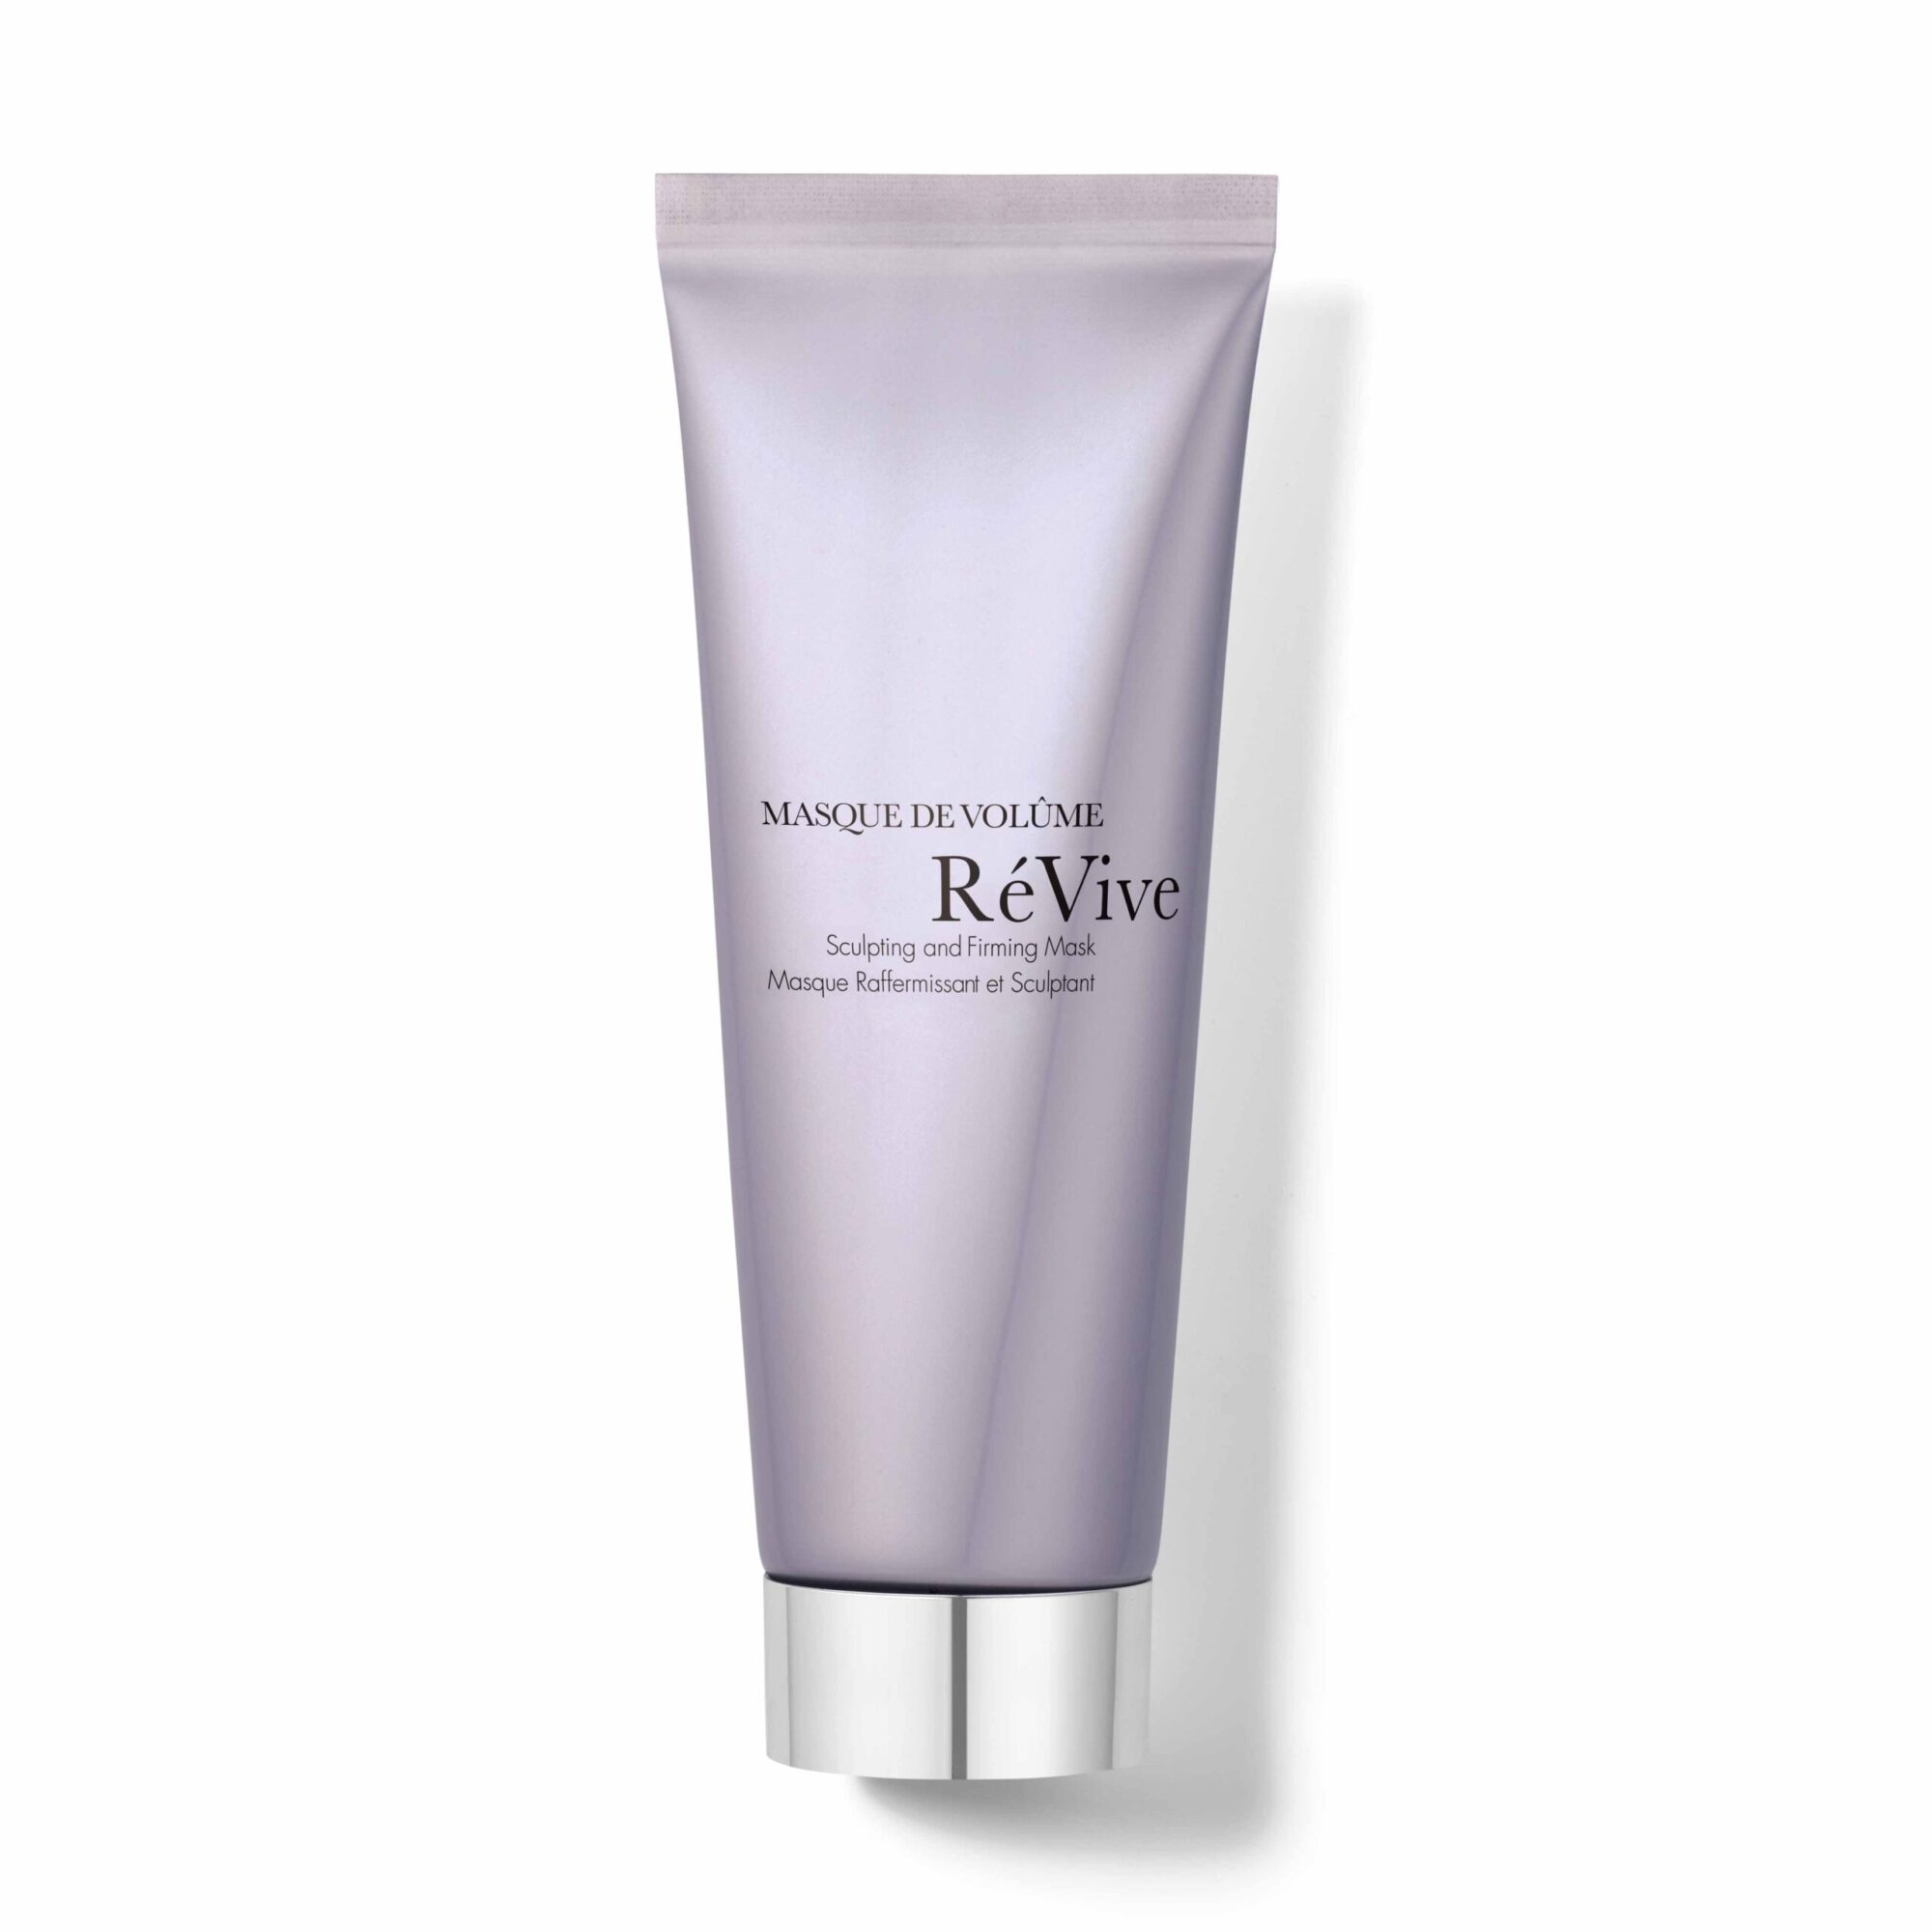 Masque De Volume Sculpting And Firming Mask 75ml - Revive